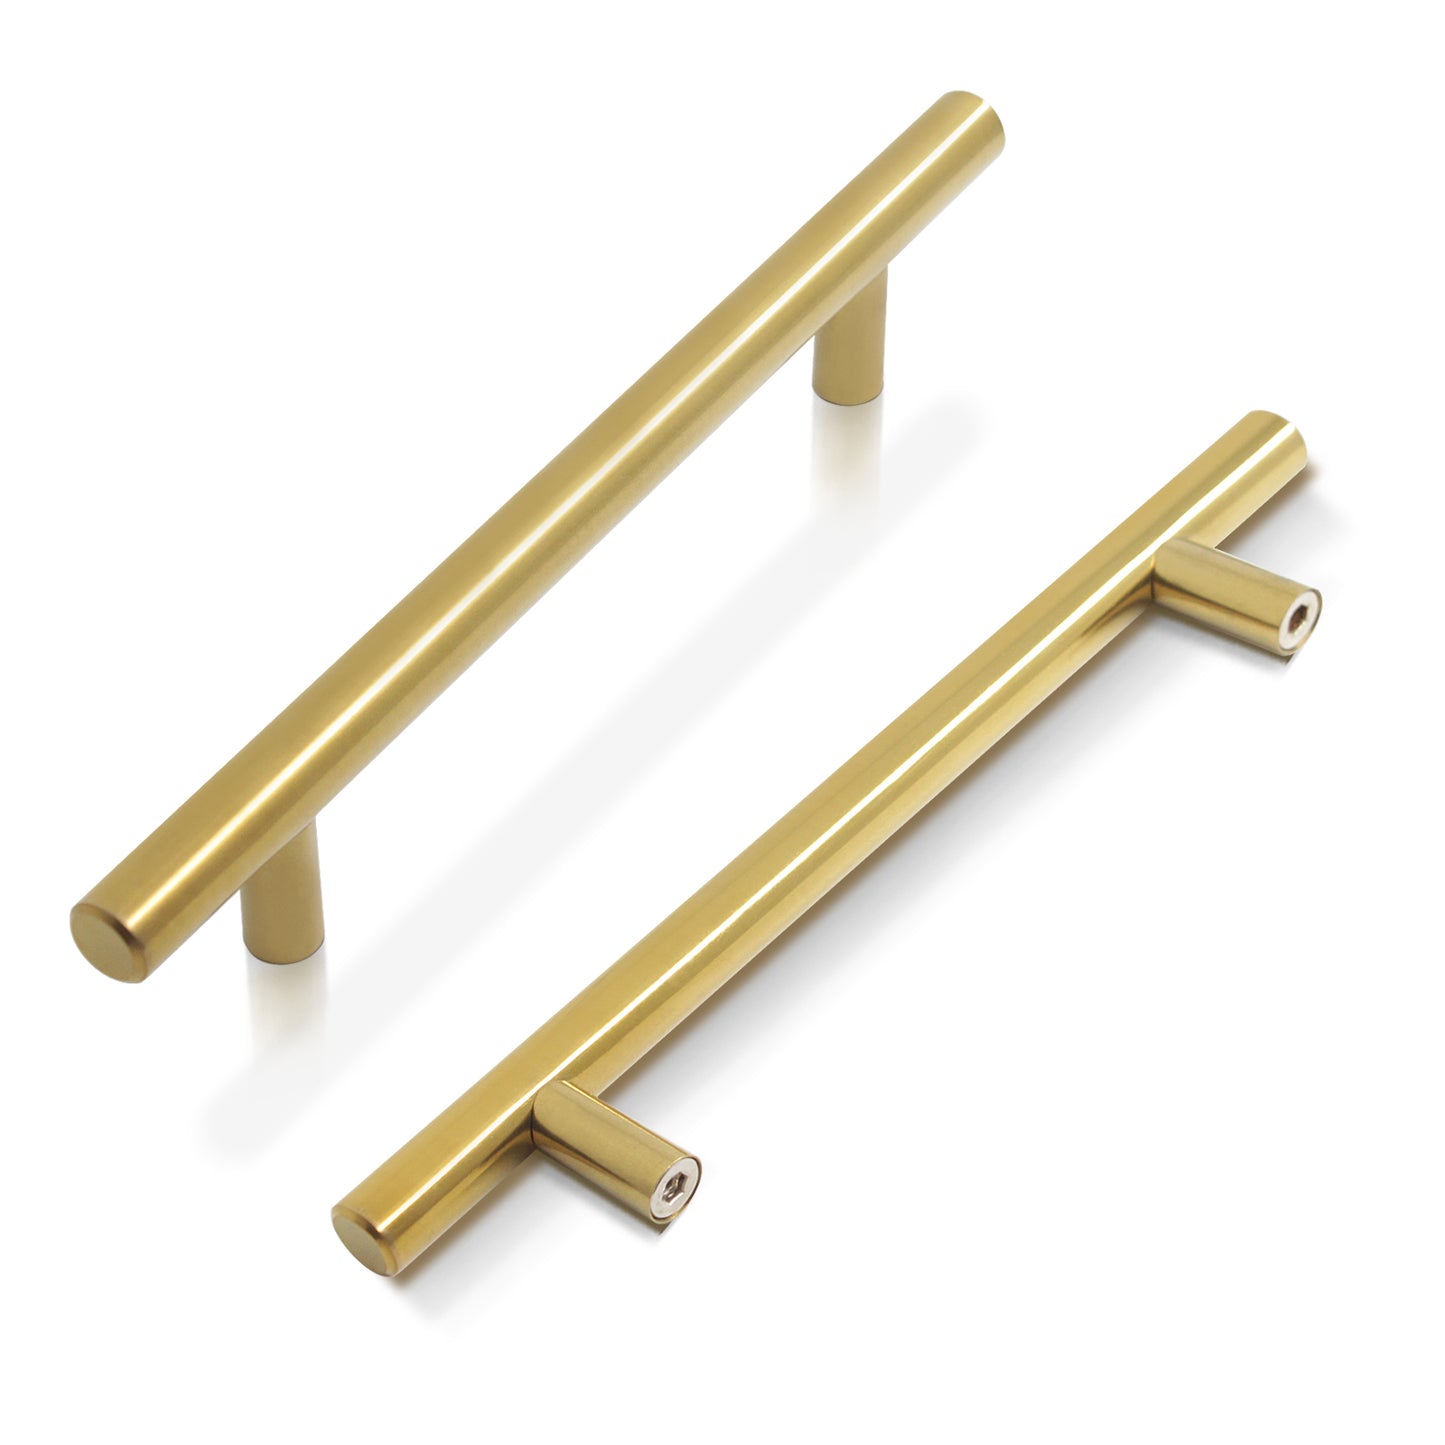 Stainless Steel T Bar Cabinet Handles Gold Finish, 128mm 5inch Hole Centers - Probrico